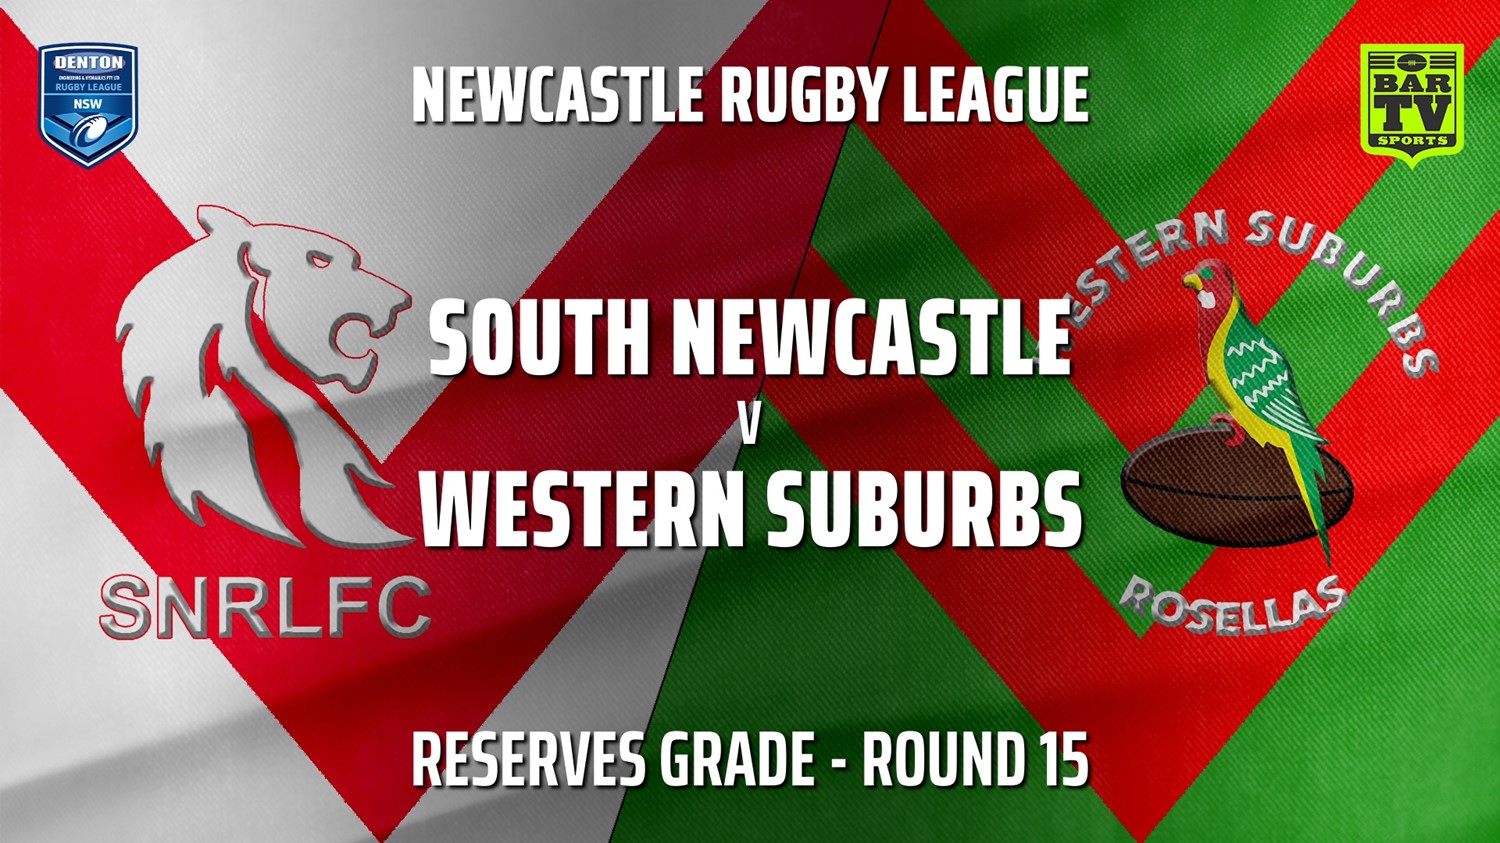 210717-Newcastle Round 15 - Reserves Grade - South Newcastle v Western Suburbs Rosellas Slate Image